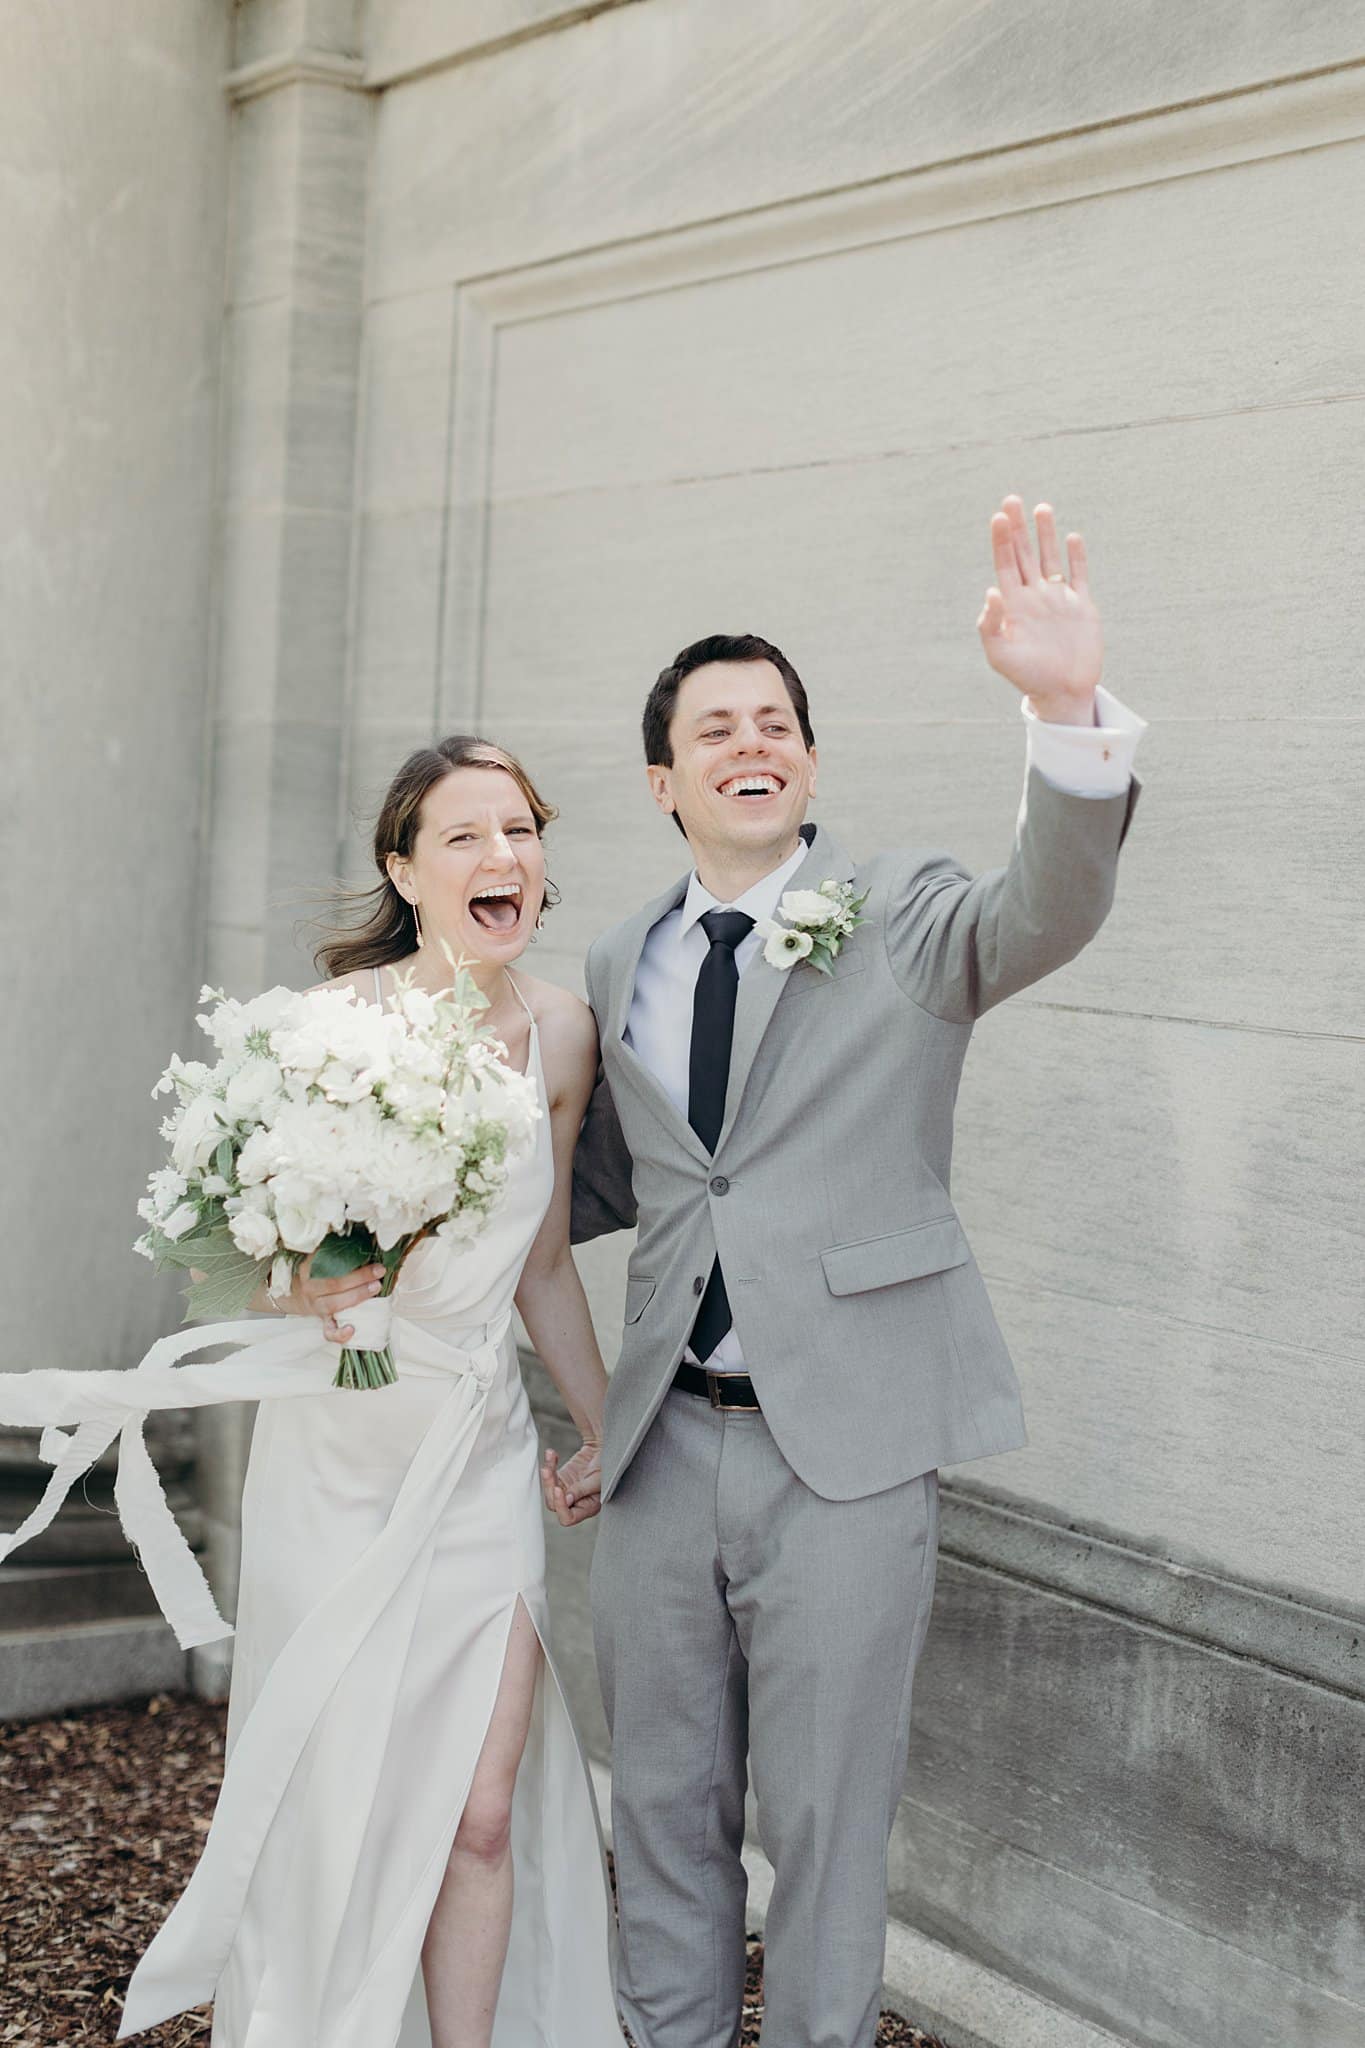 Couple Waving After Wedding Ceremony